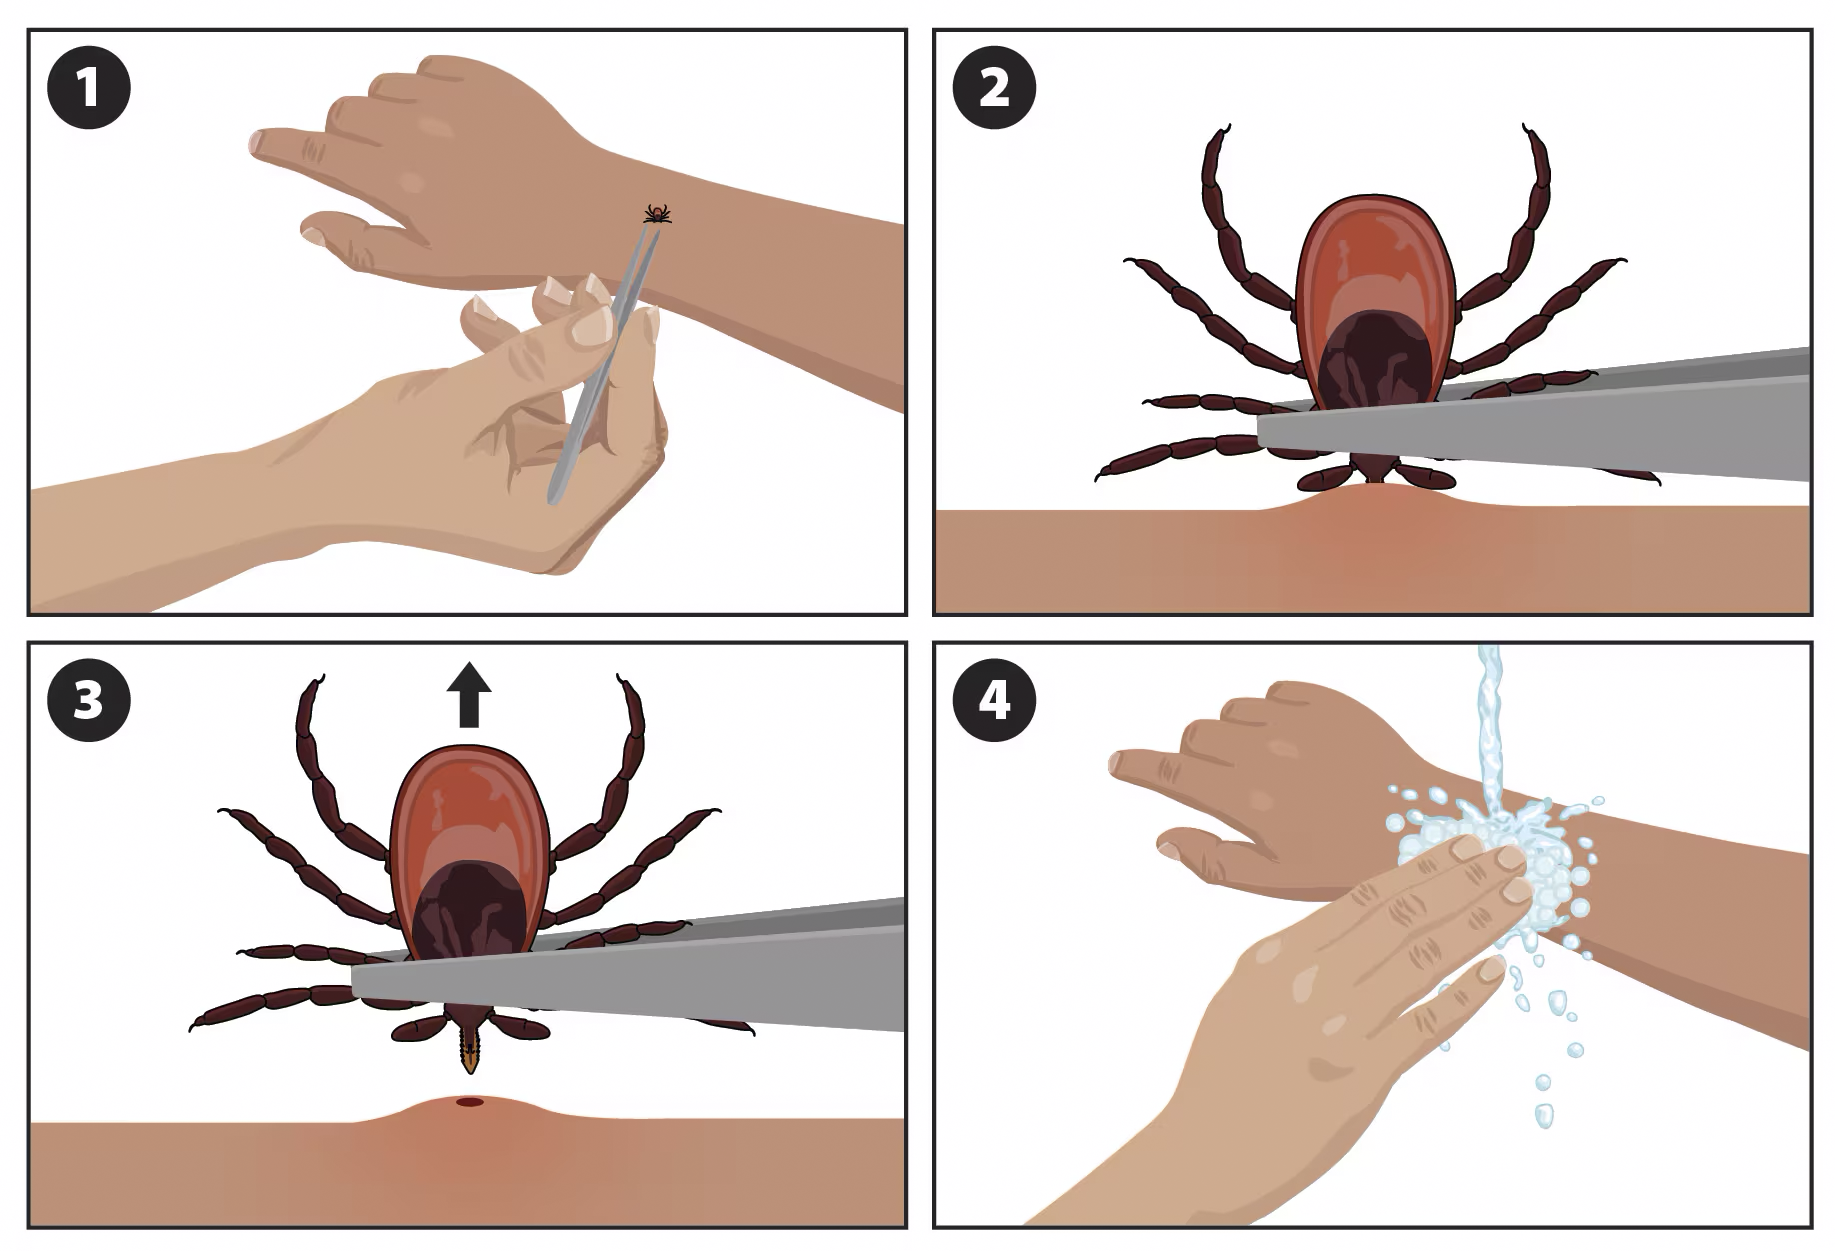 Visual reflecting the 4 steps of how to remove a tick. 